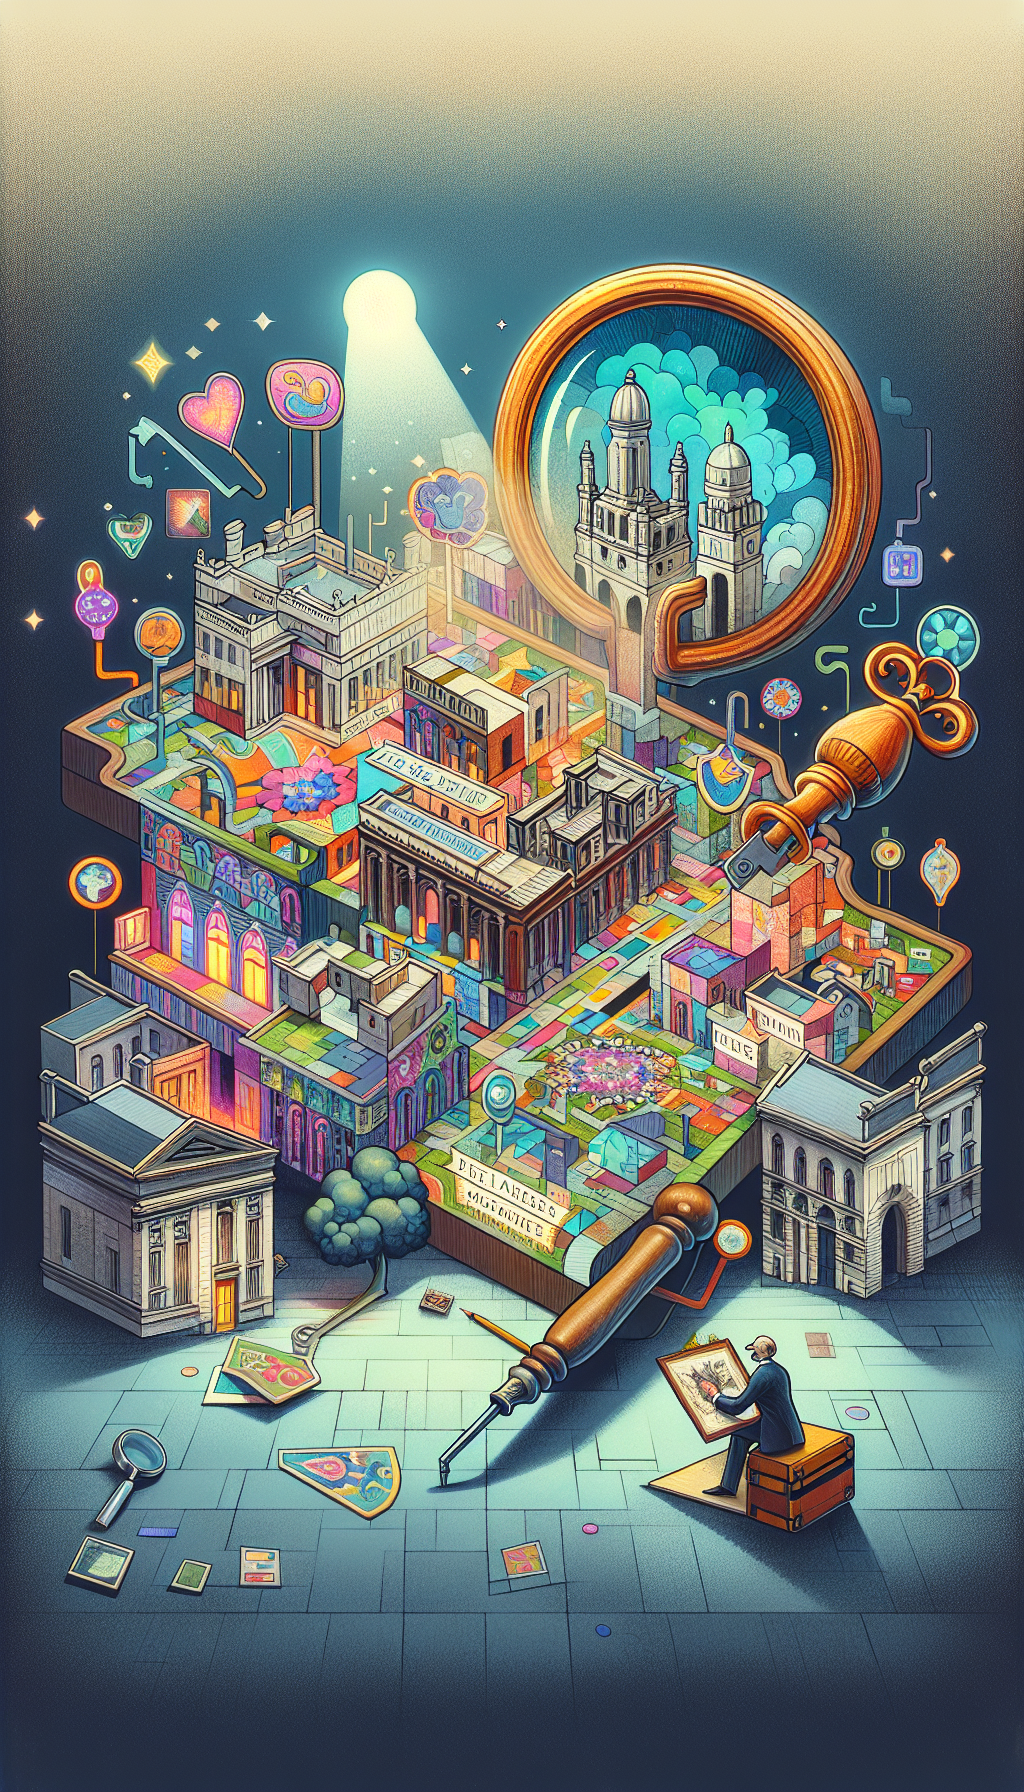 A whimsical, patchwork-style illustration depicts an artist turning a giant, ornate key into a colorful map of local buildings, each adorned with different artistic symbols representing services—framing, restoration, exhibitions. A magnifying glass hovers over the map, under which "Free Art Appraisers" glow, spotlighting their proximity to the artist, imbuing the local community with a sense of artistic treasure-hunting potential.